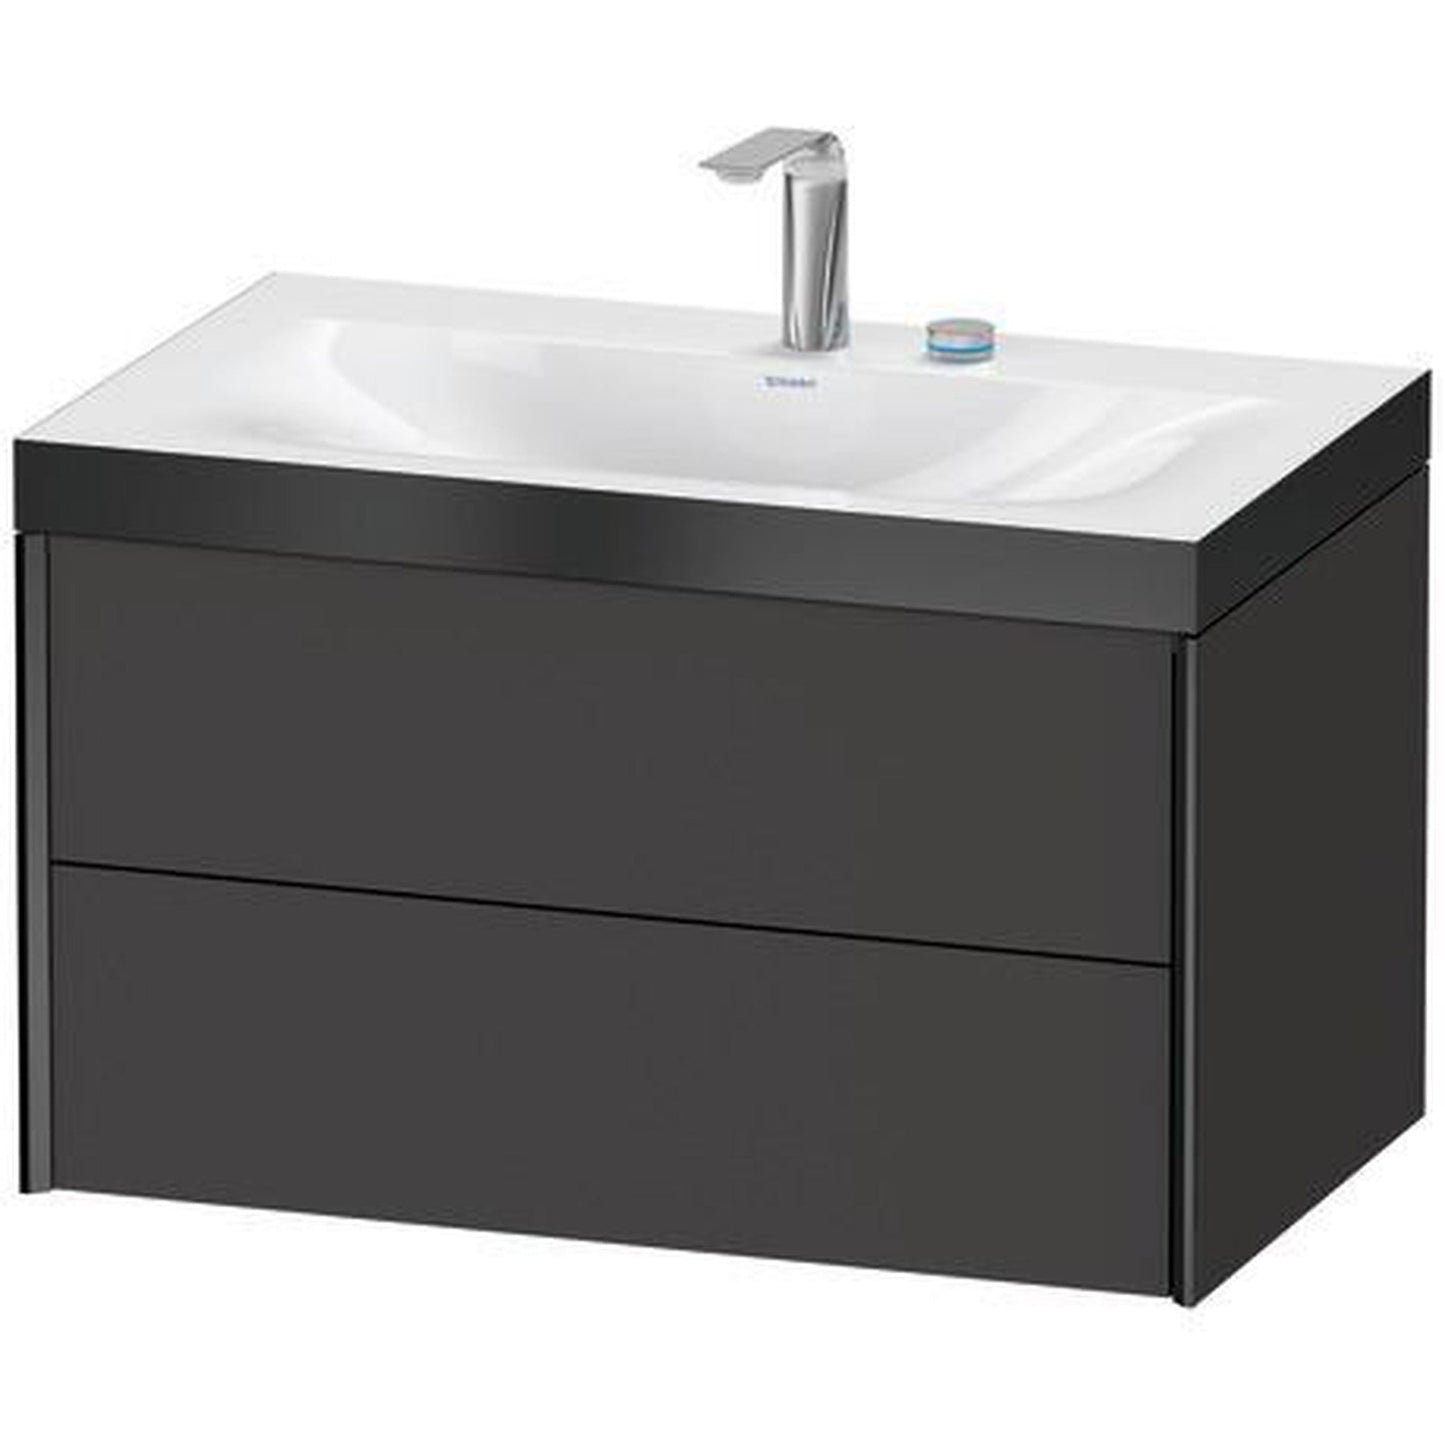 Duravit Xviu 31" x 20" x 19" Two Drawer C-Bonded Wall-Mount Vanity Kit With Two Tap Holes, Graphite (XV4615EB280P)